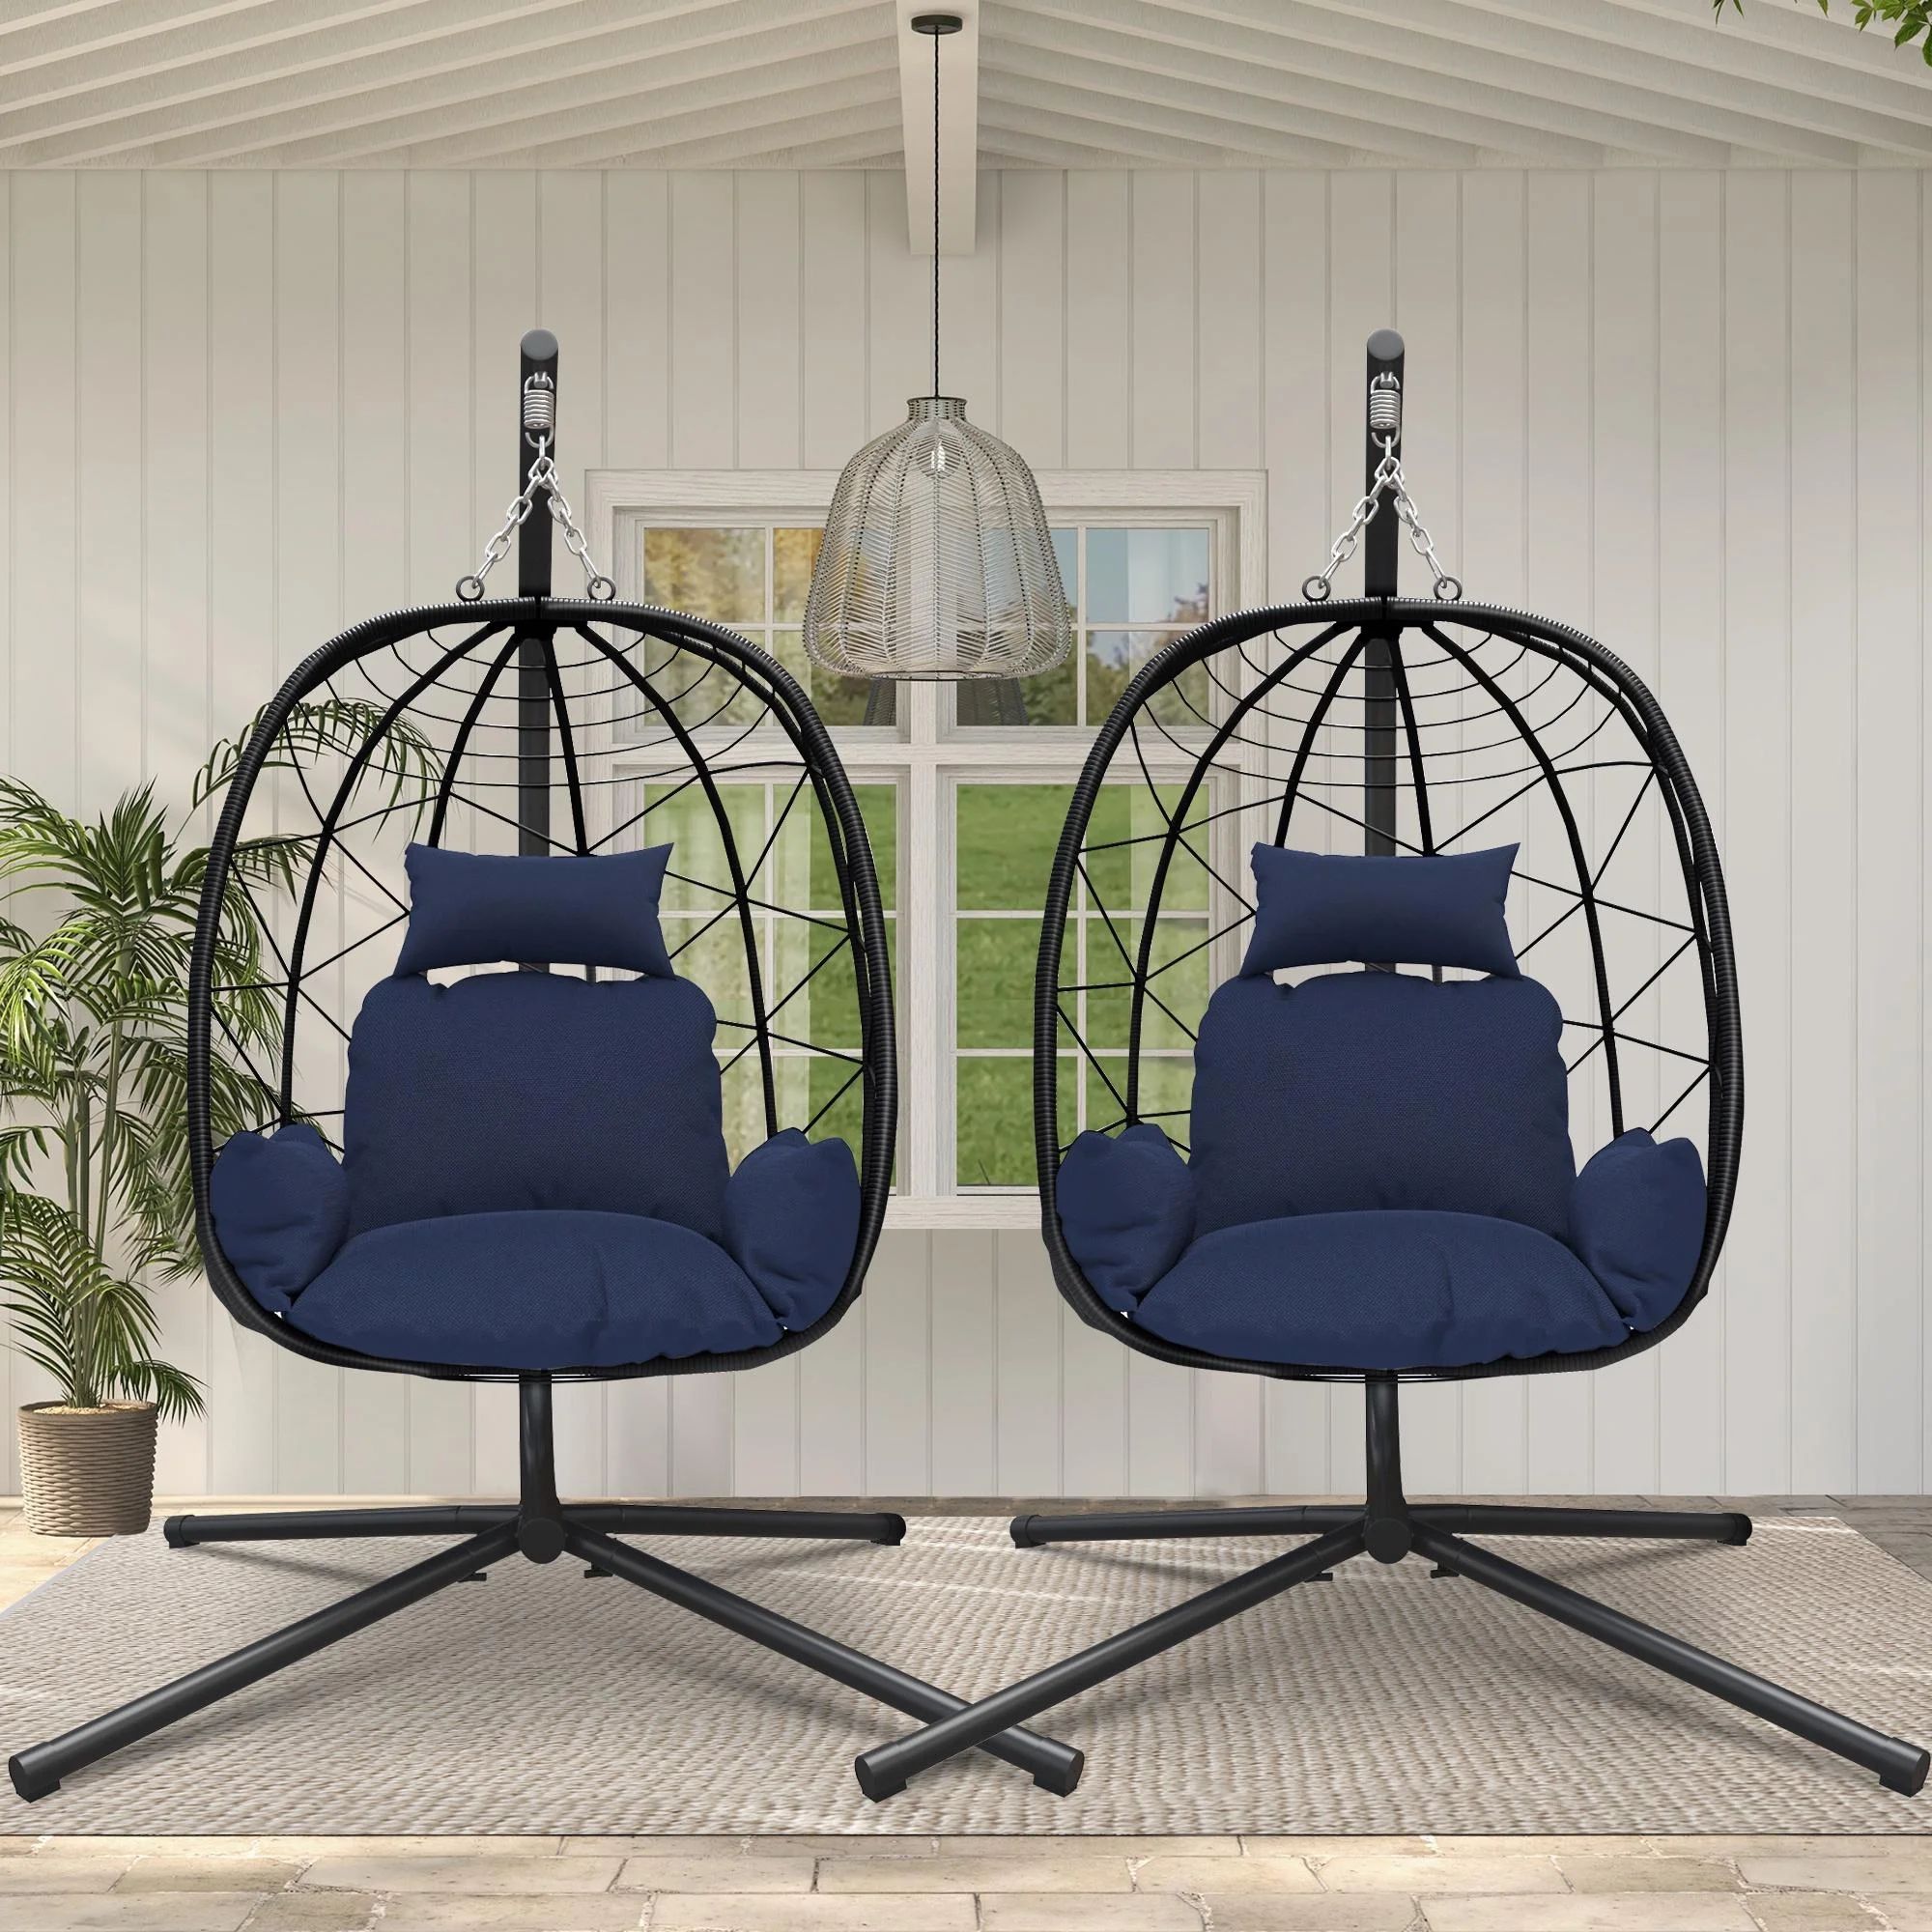 2 Piece Egg Chair, Outdoor Wicker Egg Chair with Stand, Patio Swing Chair Hammock Basket Chair wi... | Walmart (US)